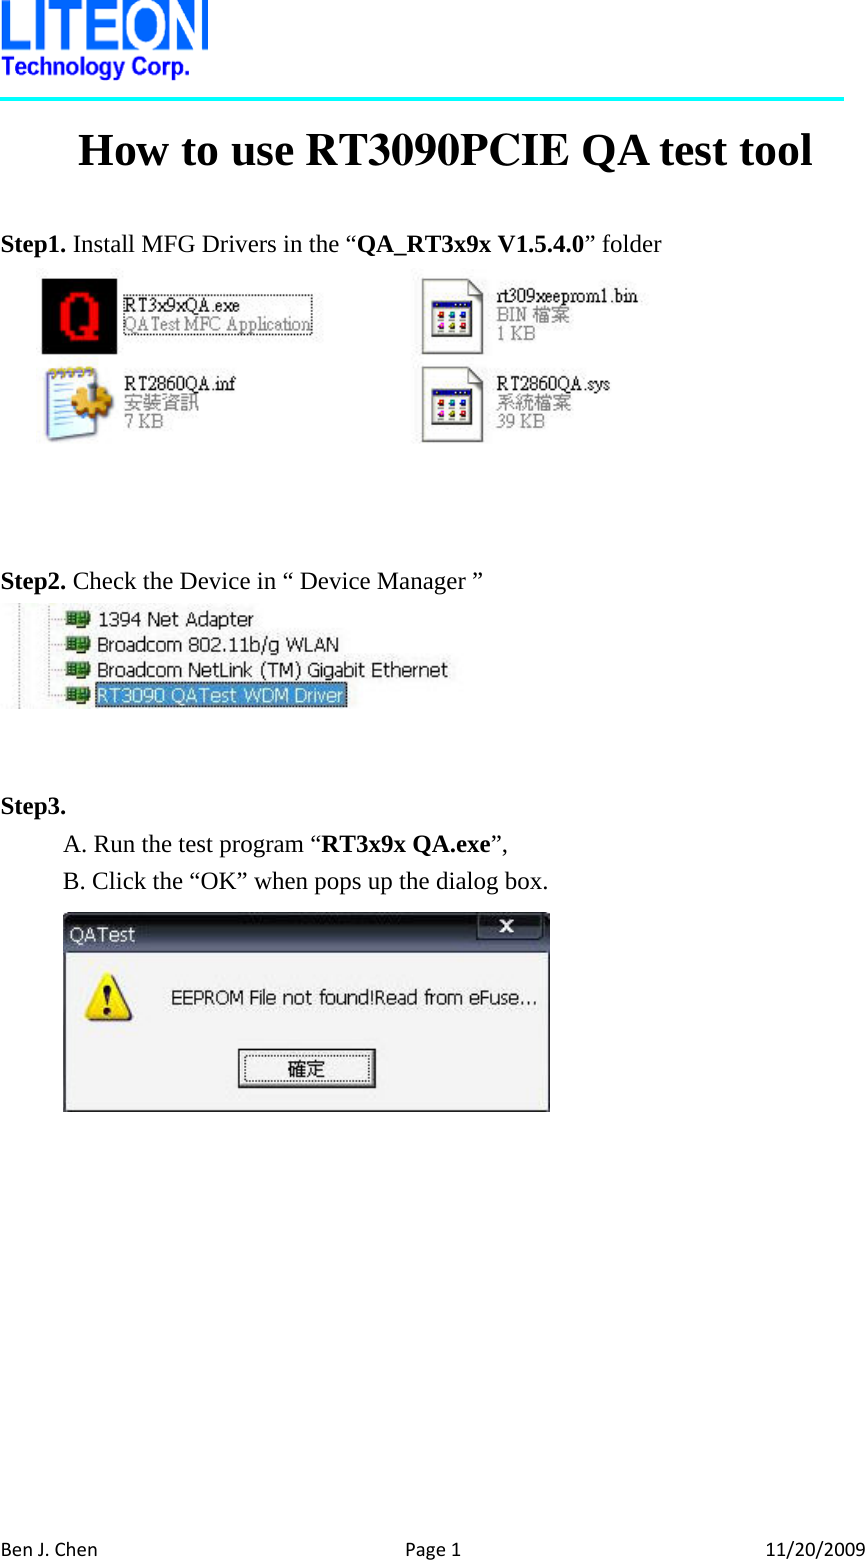 BenJ.ChenPage111/20/2009How to use RT3090PCIE QA test tool Step1. Install MFG Drivers in the “QA_RT3x9x V1.5.4.0” folder    Step2. Check the Device in “ Device Manager ”   Step3.  A. Run the test program “RT3x9x QA.exe”, B. Click the “OK” when pops up the dialog box.    